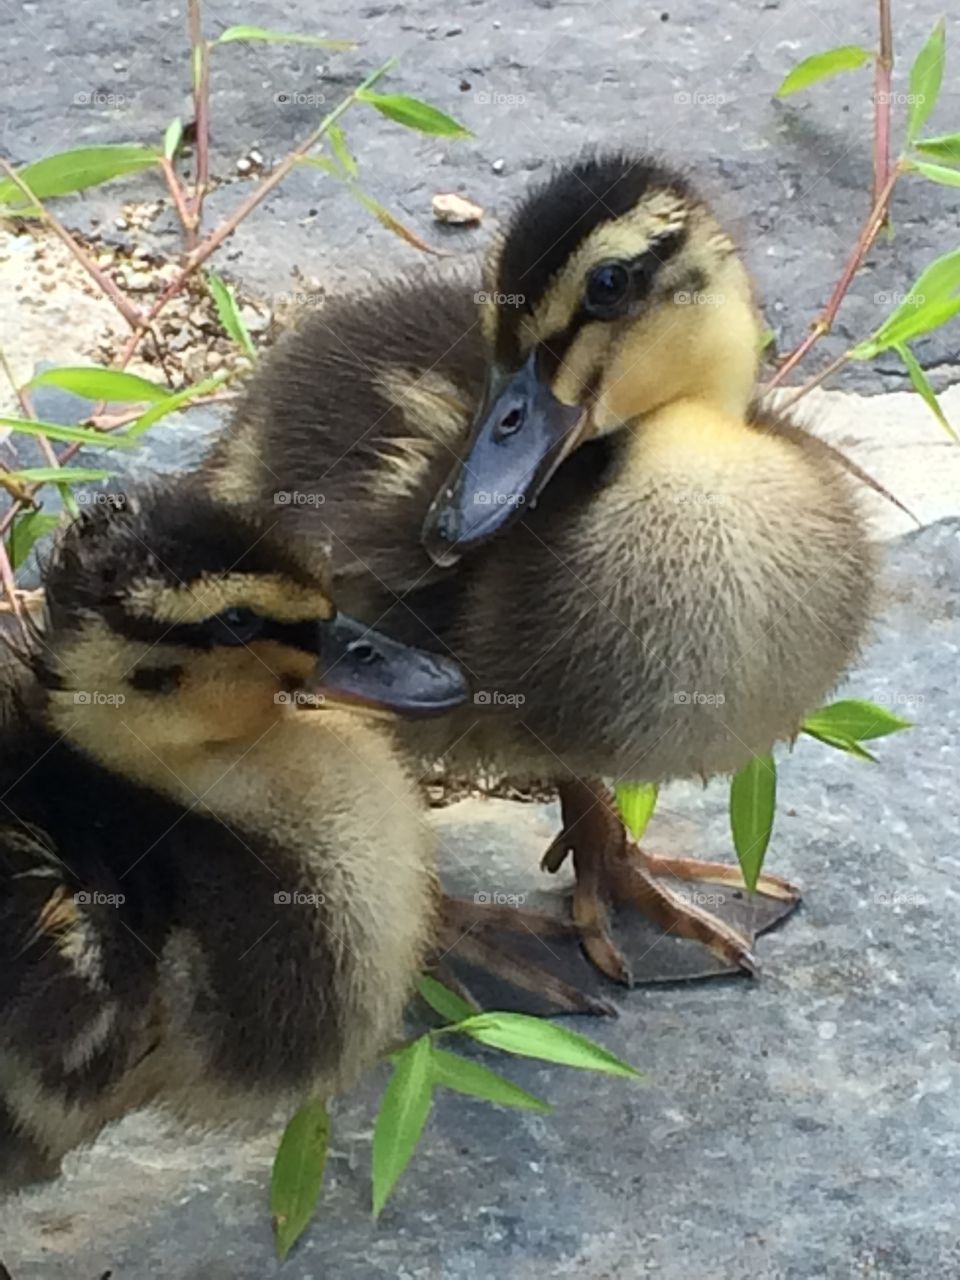 A pair of orphaned duckling I rescued